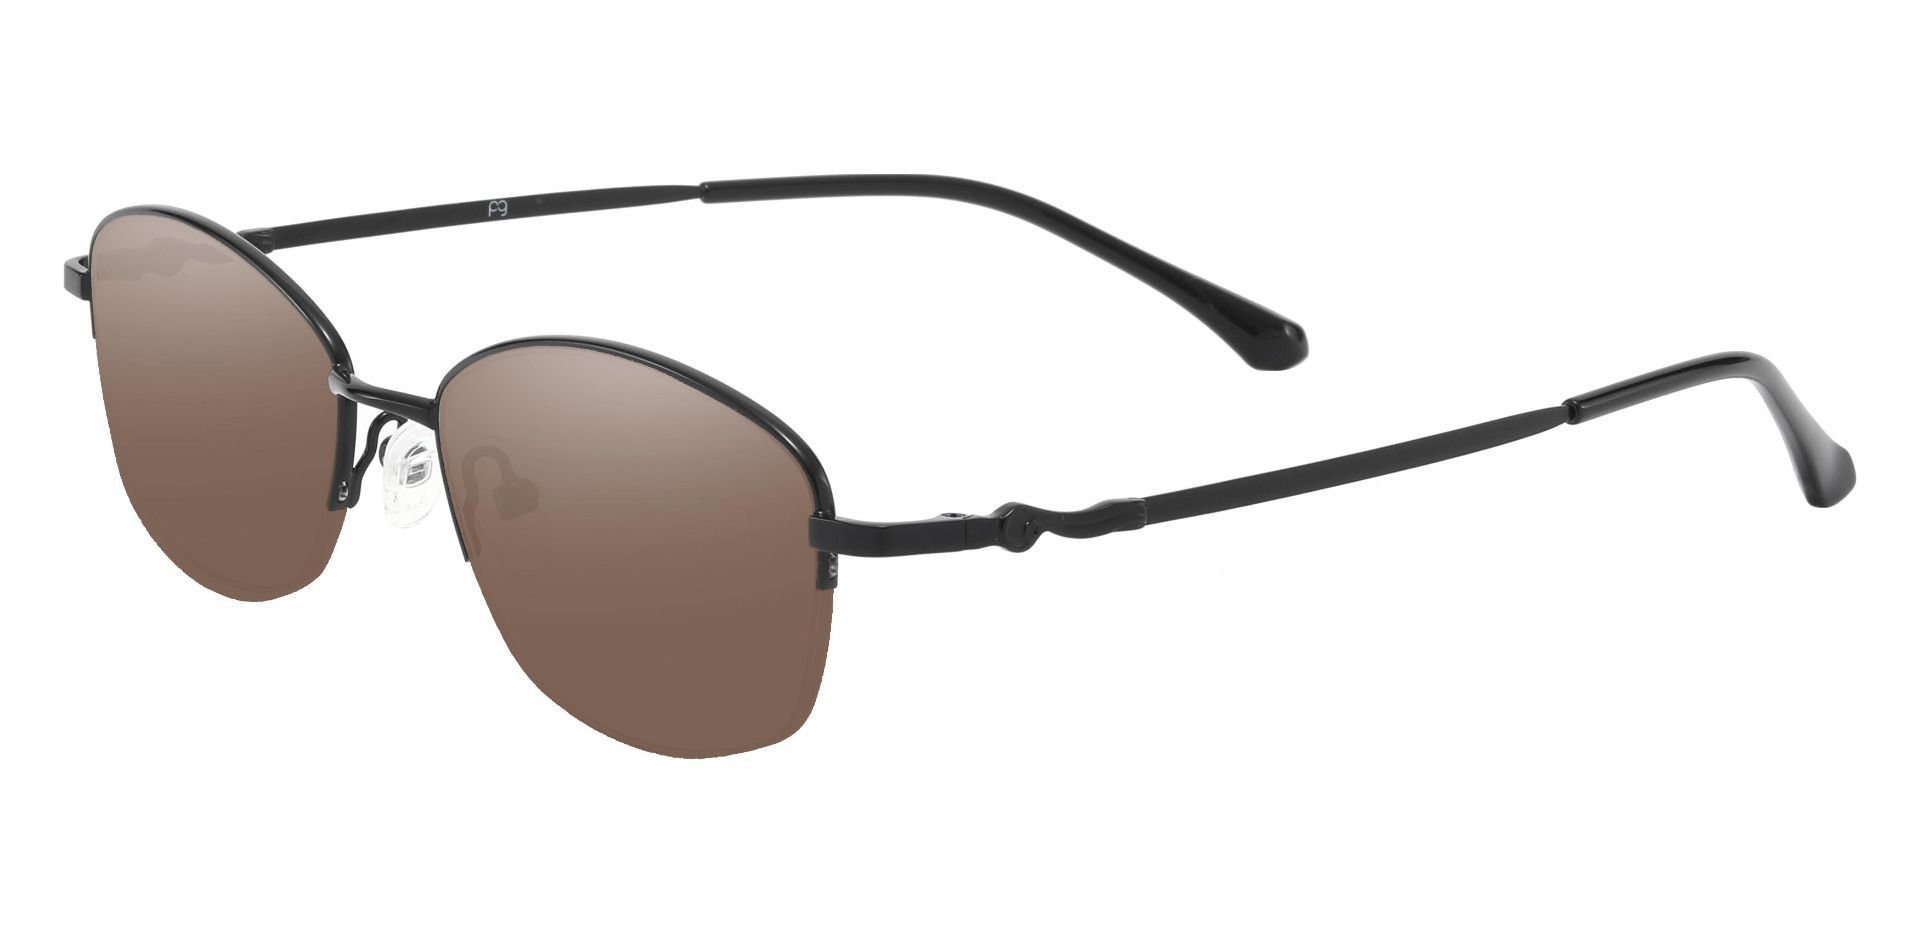 Beulah Oval Reading Sunglasses - Black Frame With Brown Lenses